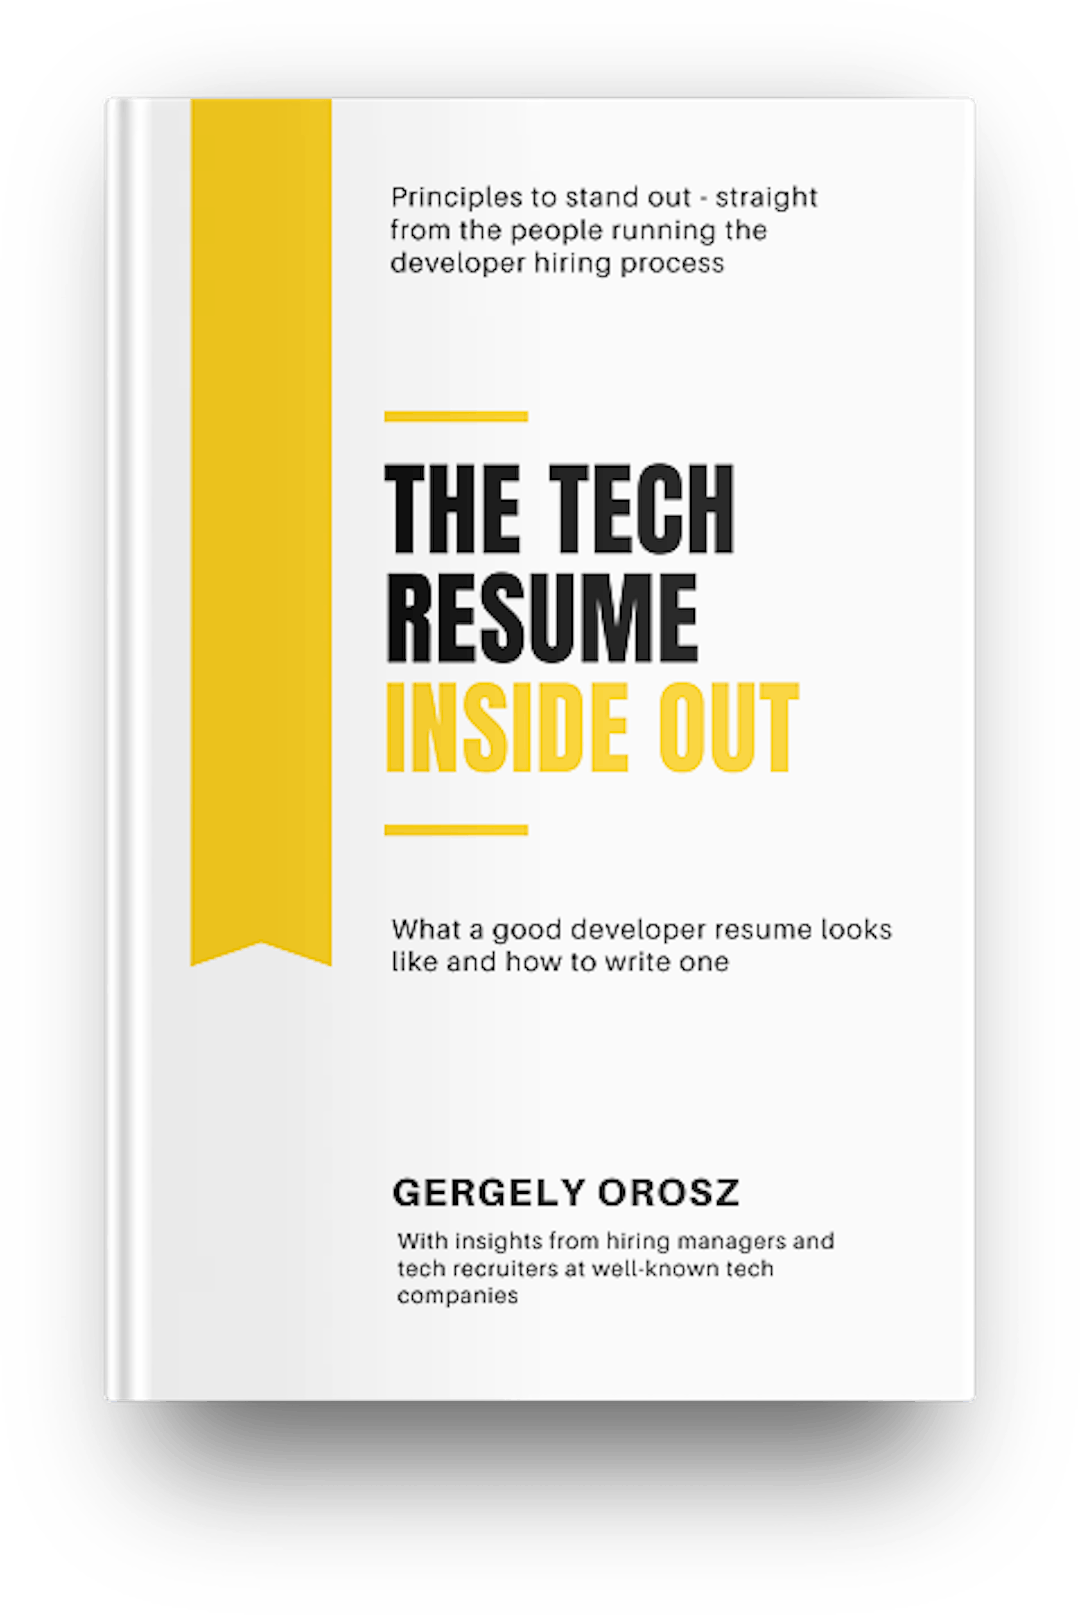 The Tech Resume Inside Out book.